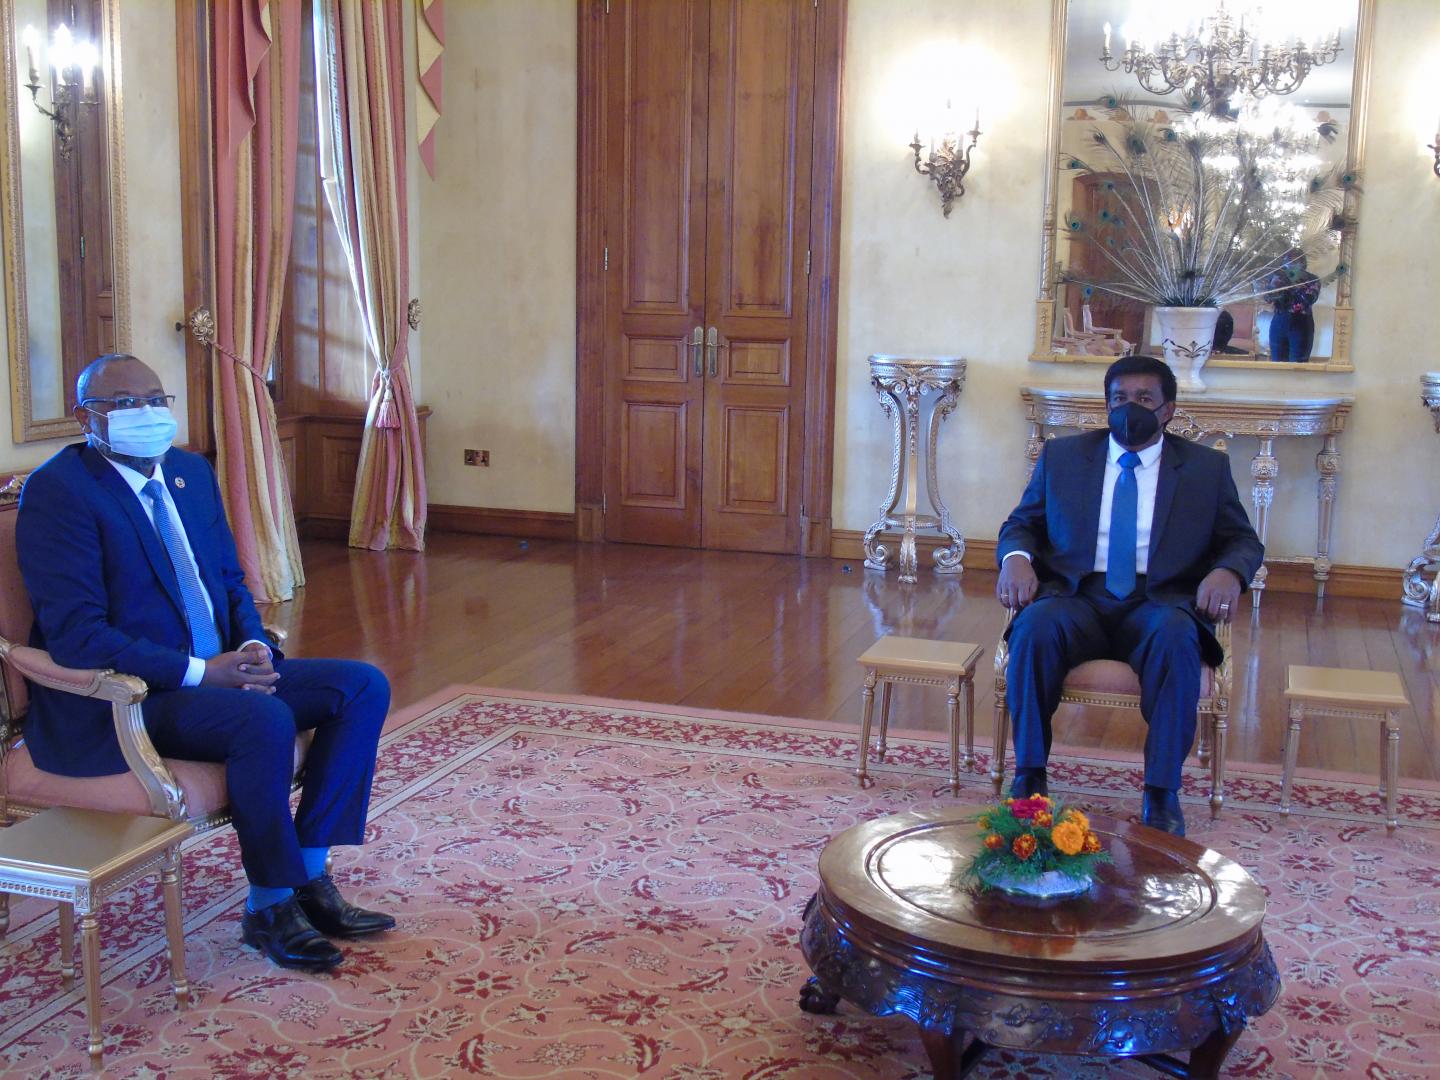 Dr Laurent Musango, WHO Representative in Mauritius discussing WHO support to the country with His Excellency Mr Prithivirajsing Roopun, the President of the Republic of Mauritius